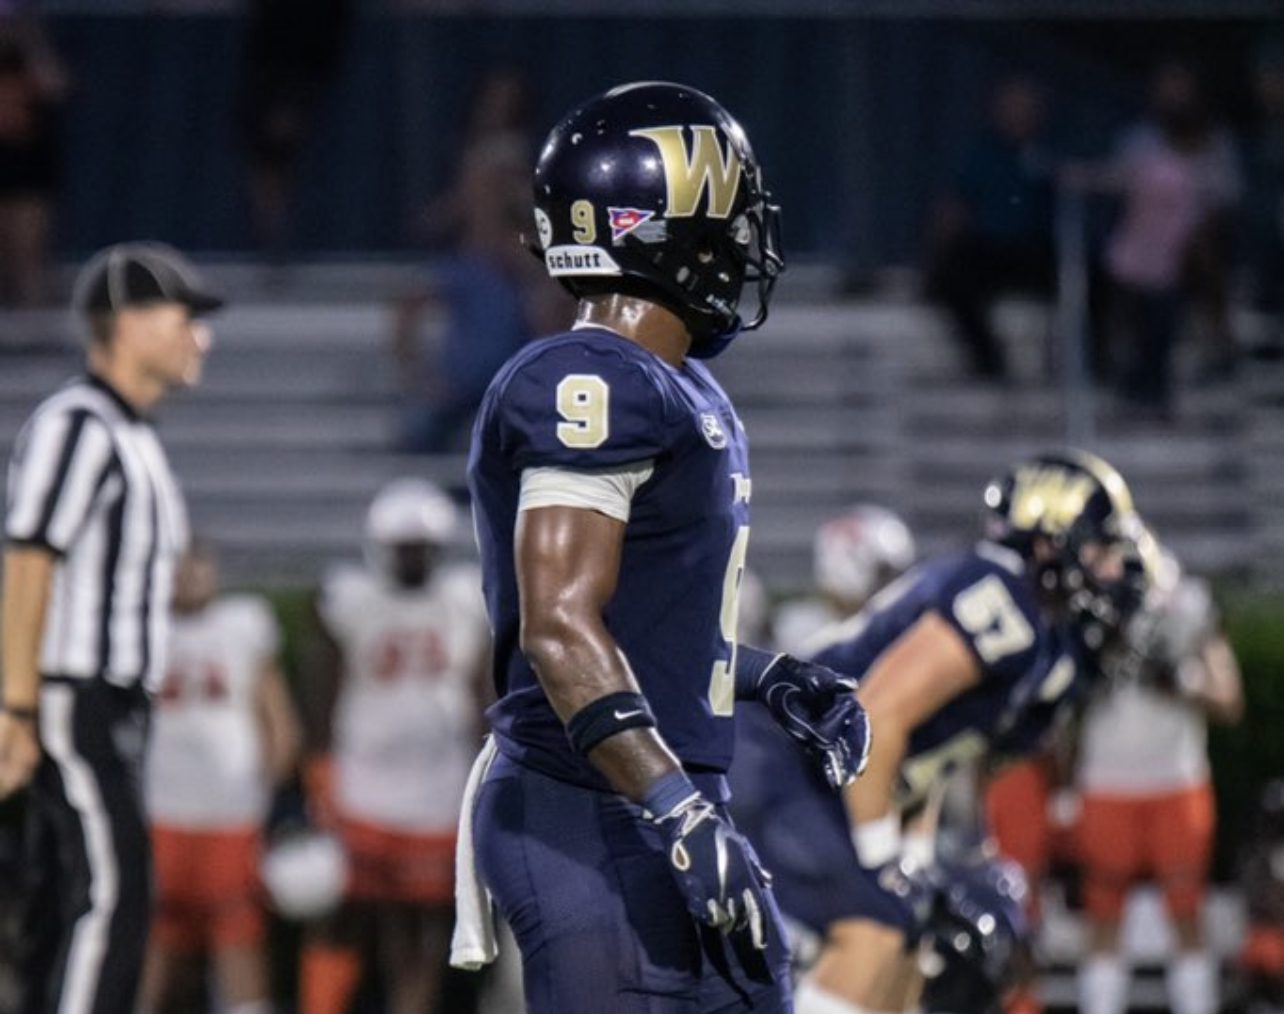 Daron Bowles the hard hitting defensive back from Wingate University recently sat down with NFL Draft Diamonds owner Damond Talbot.